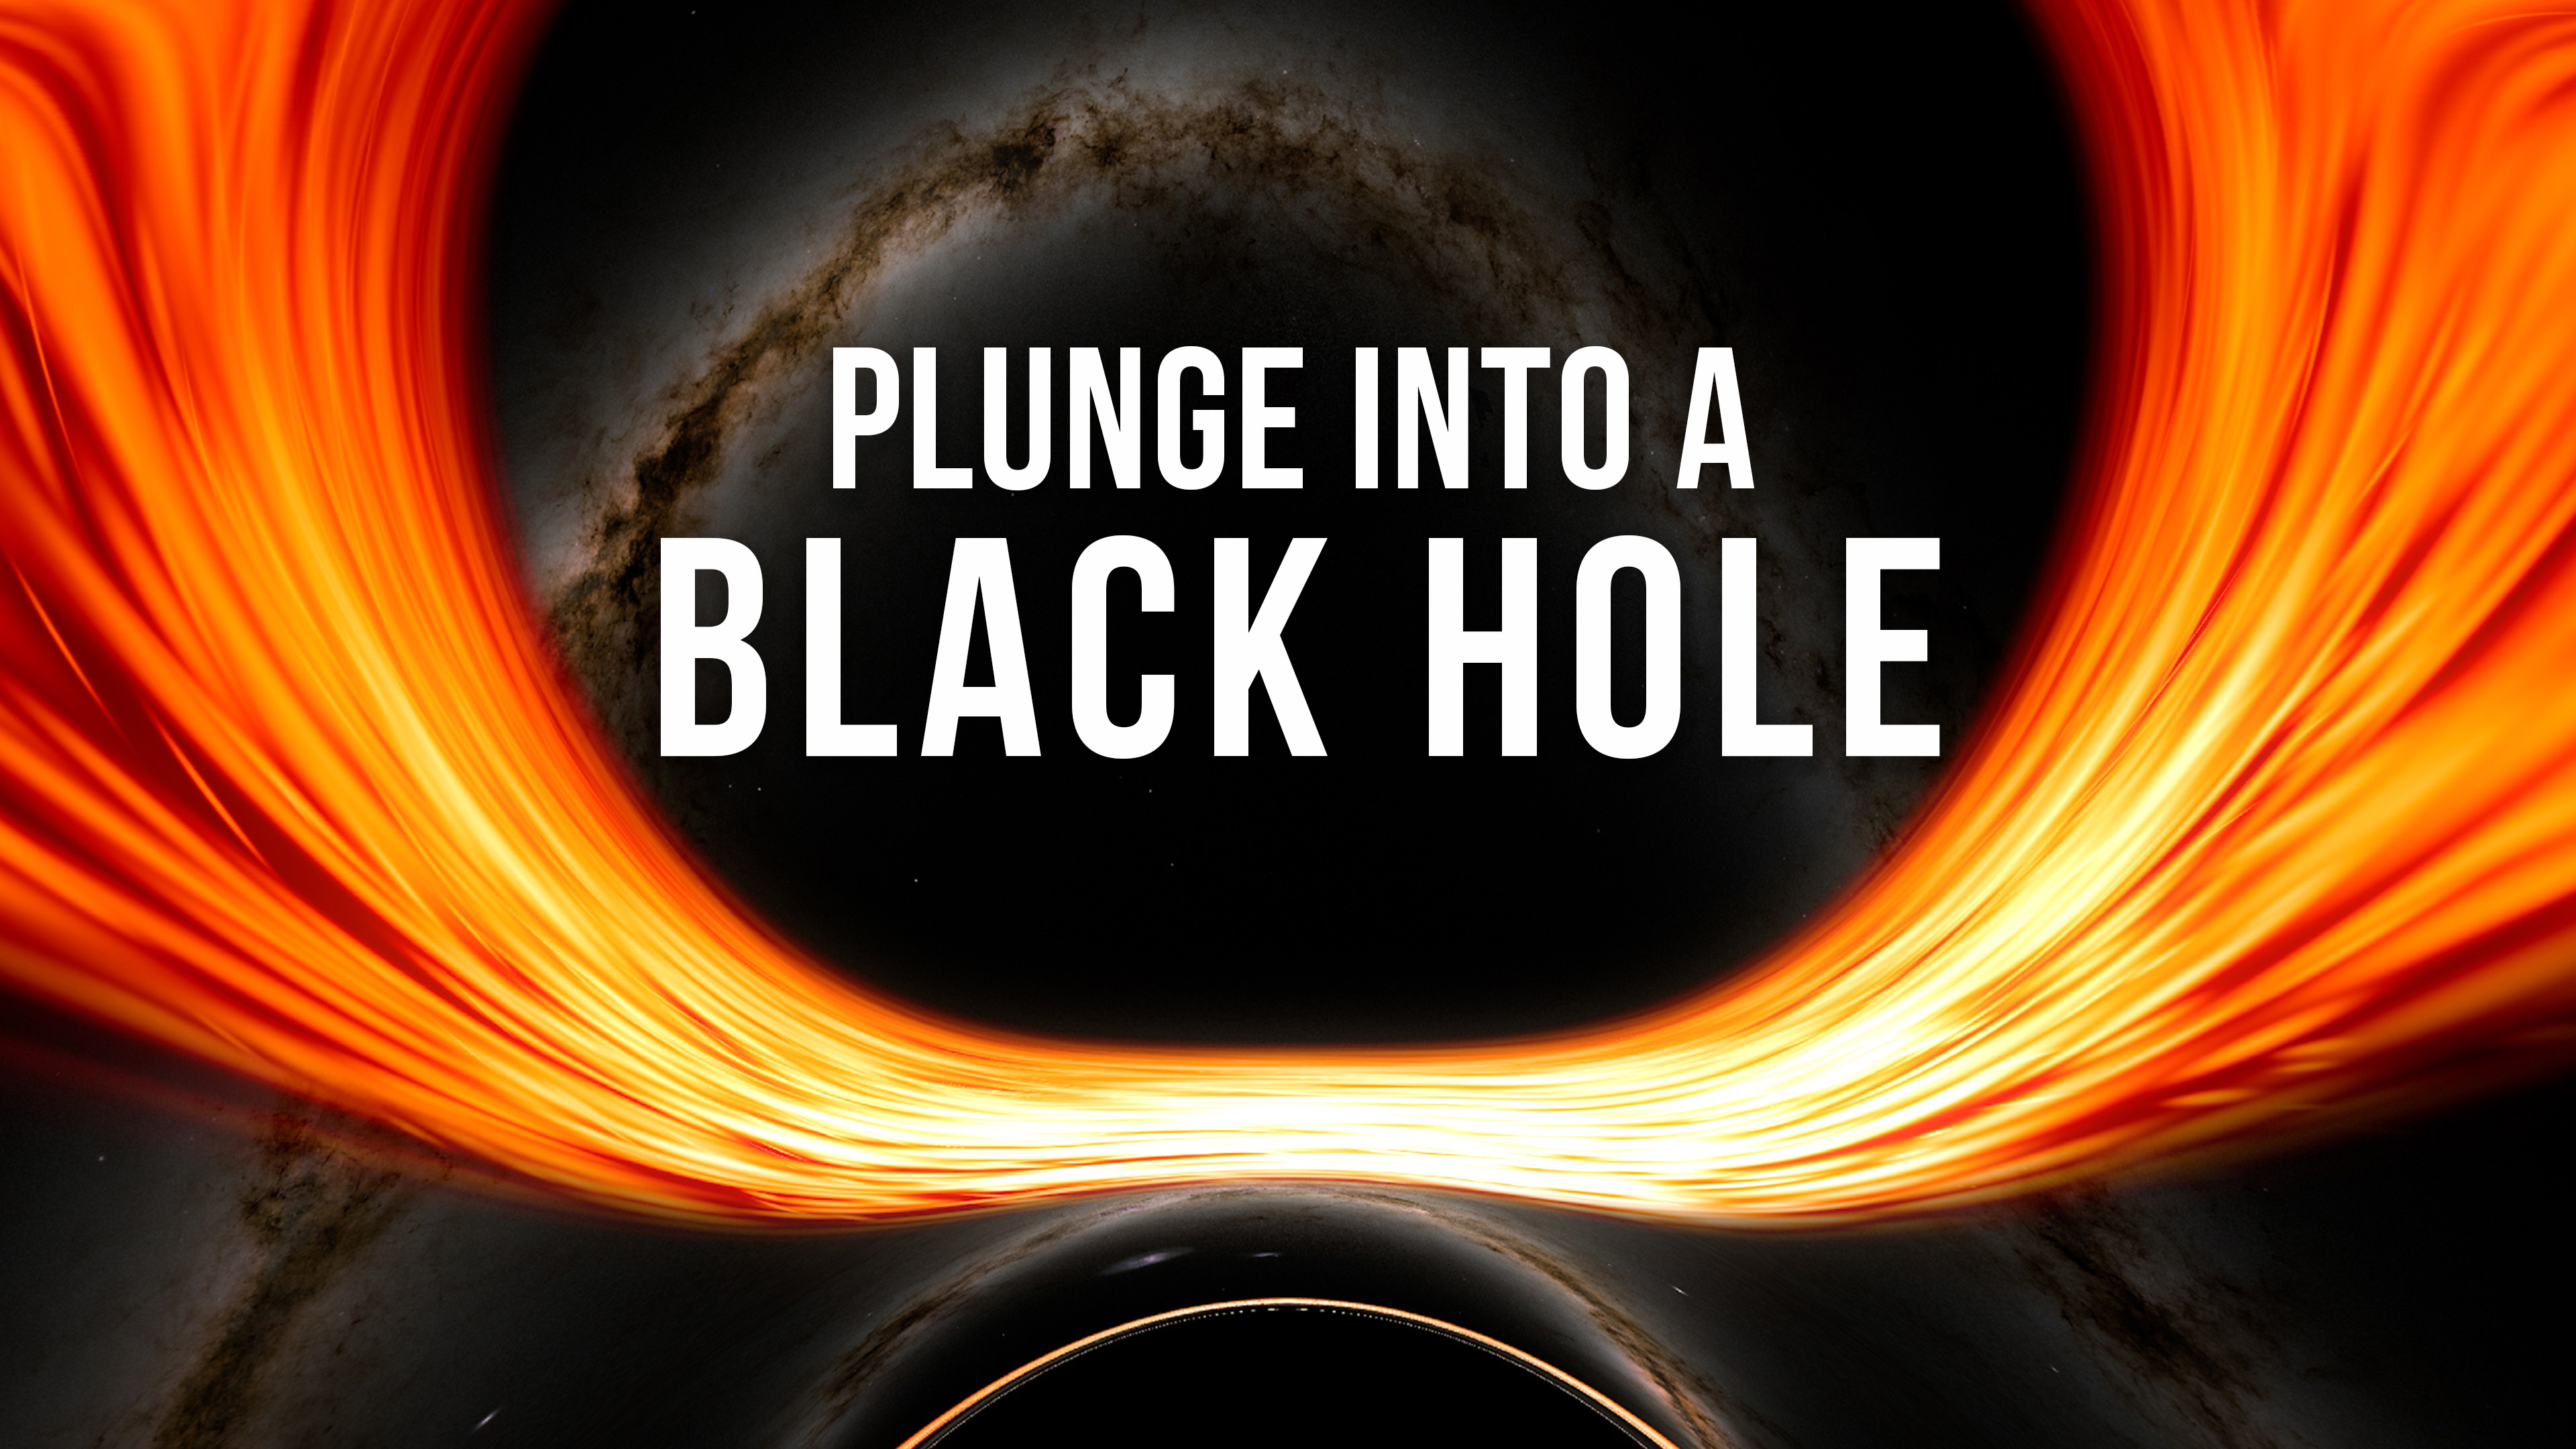 In this flight toward a supermassive black hole, labels highlight many of the fascinating features produced by the effects of general relativity along the way. This supercomputer visualization tracks a camera as it approaches, briefly orbits, and then crosses the event horizon &ampmdash; the point of no return &ampmdash; of a supersized black hole similar in mass to the one at the center of our galaxy.  Credit: NASA's Goddard Space Flight Center/J. Schnittman and B. PowellMusic: “Tidal Force,” Thomas Daniel Bellingham [PRS], Universal Production Music“Memories” from Digital Juice“Path Finder,” Eric Jacobsen [TONO] and Lorenzo Castellarin [BMI], Universal Production MusicWatch this video on the NASA Goddard YouTube channel.Complete transcript available.